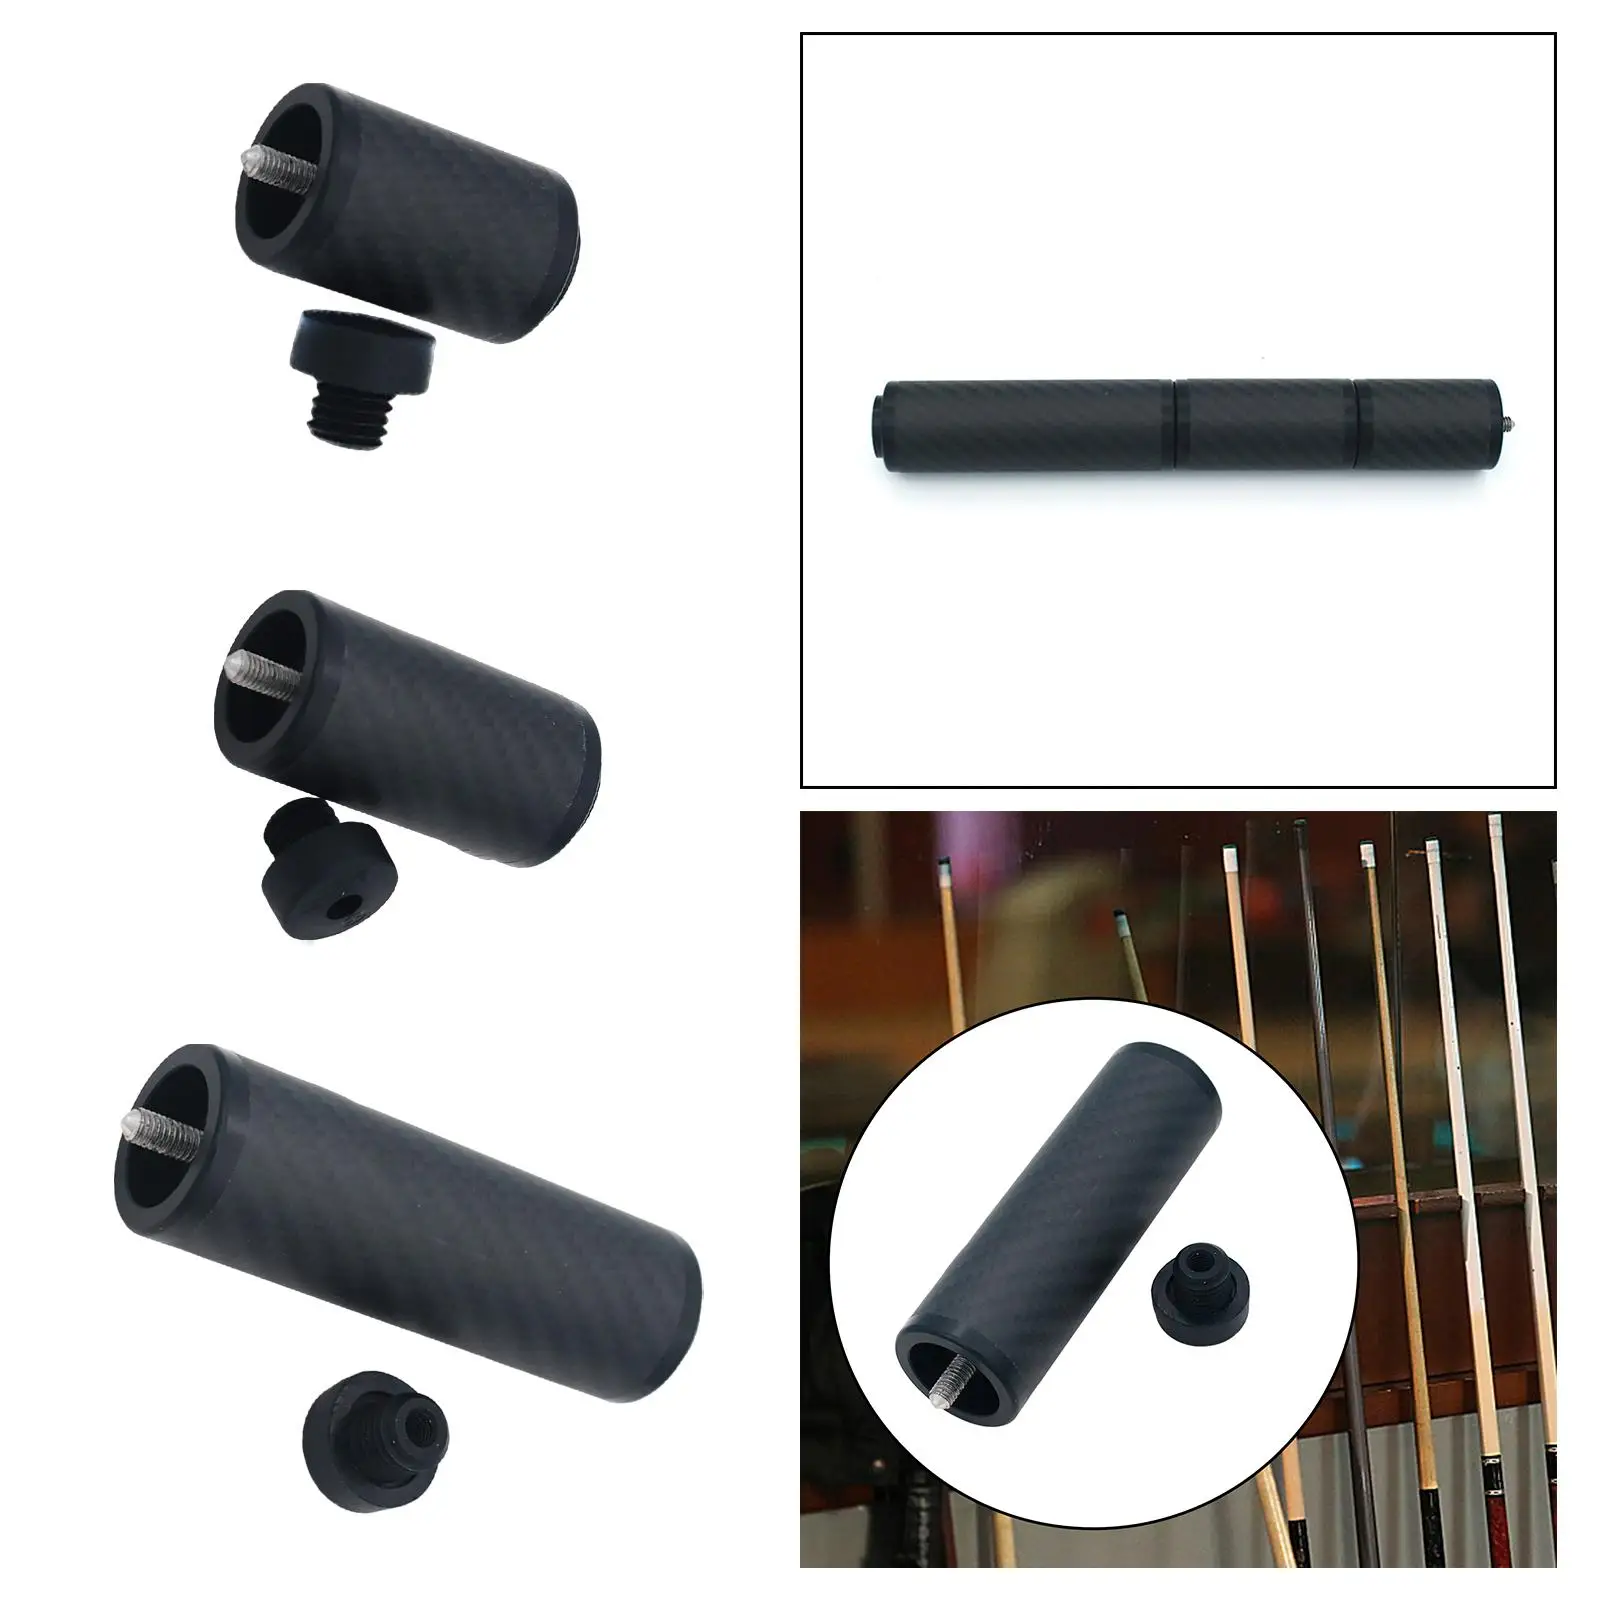 Billiards Pool Cue Extension Professional Portable Snooker Pool Cue Extension with Bumper for Snooker Beginners Enthusiast